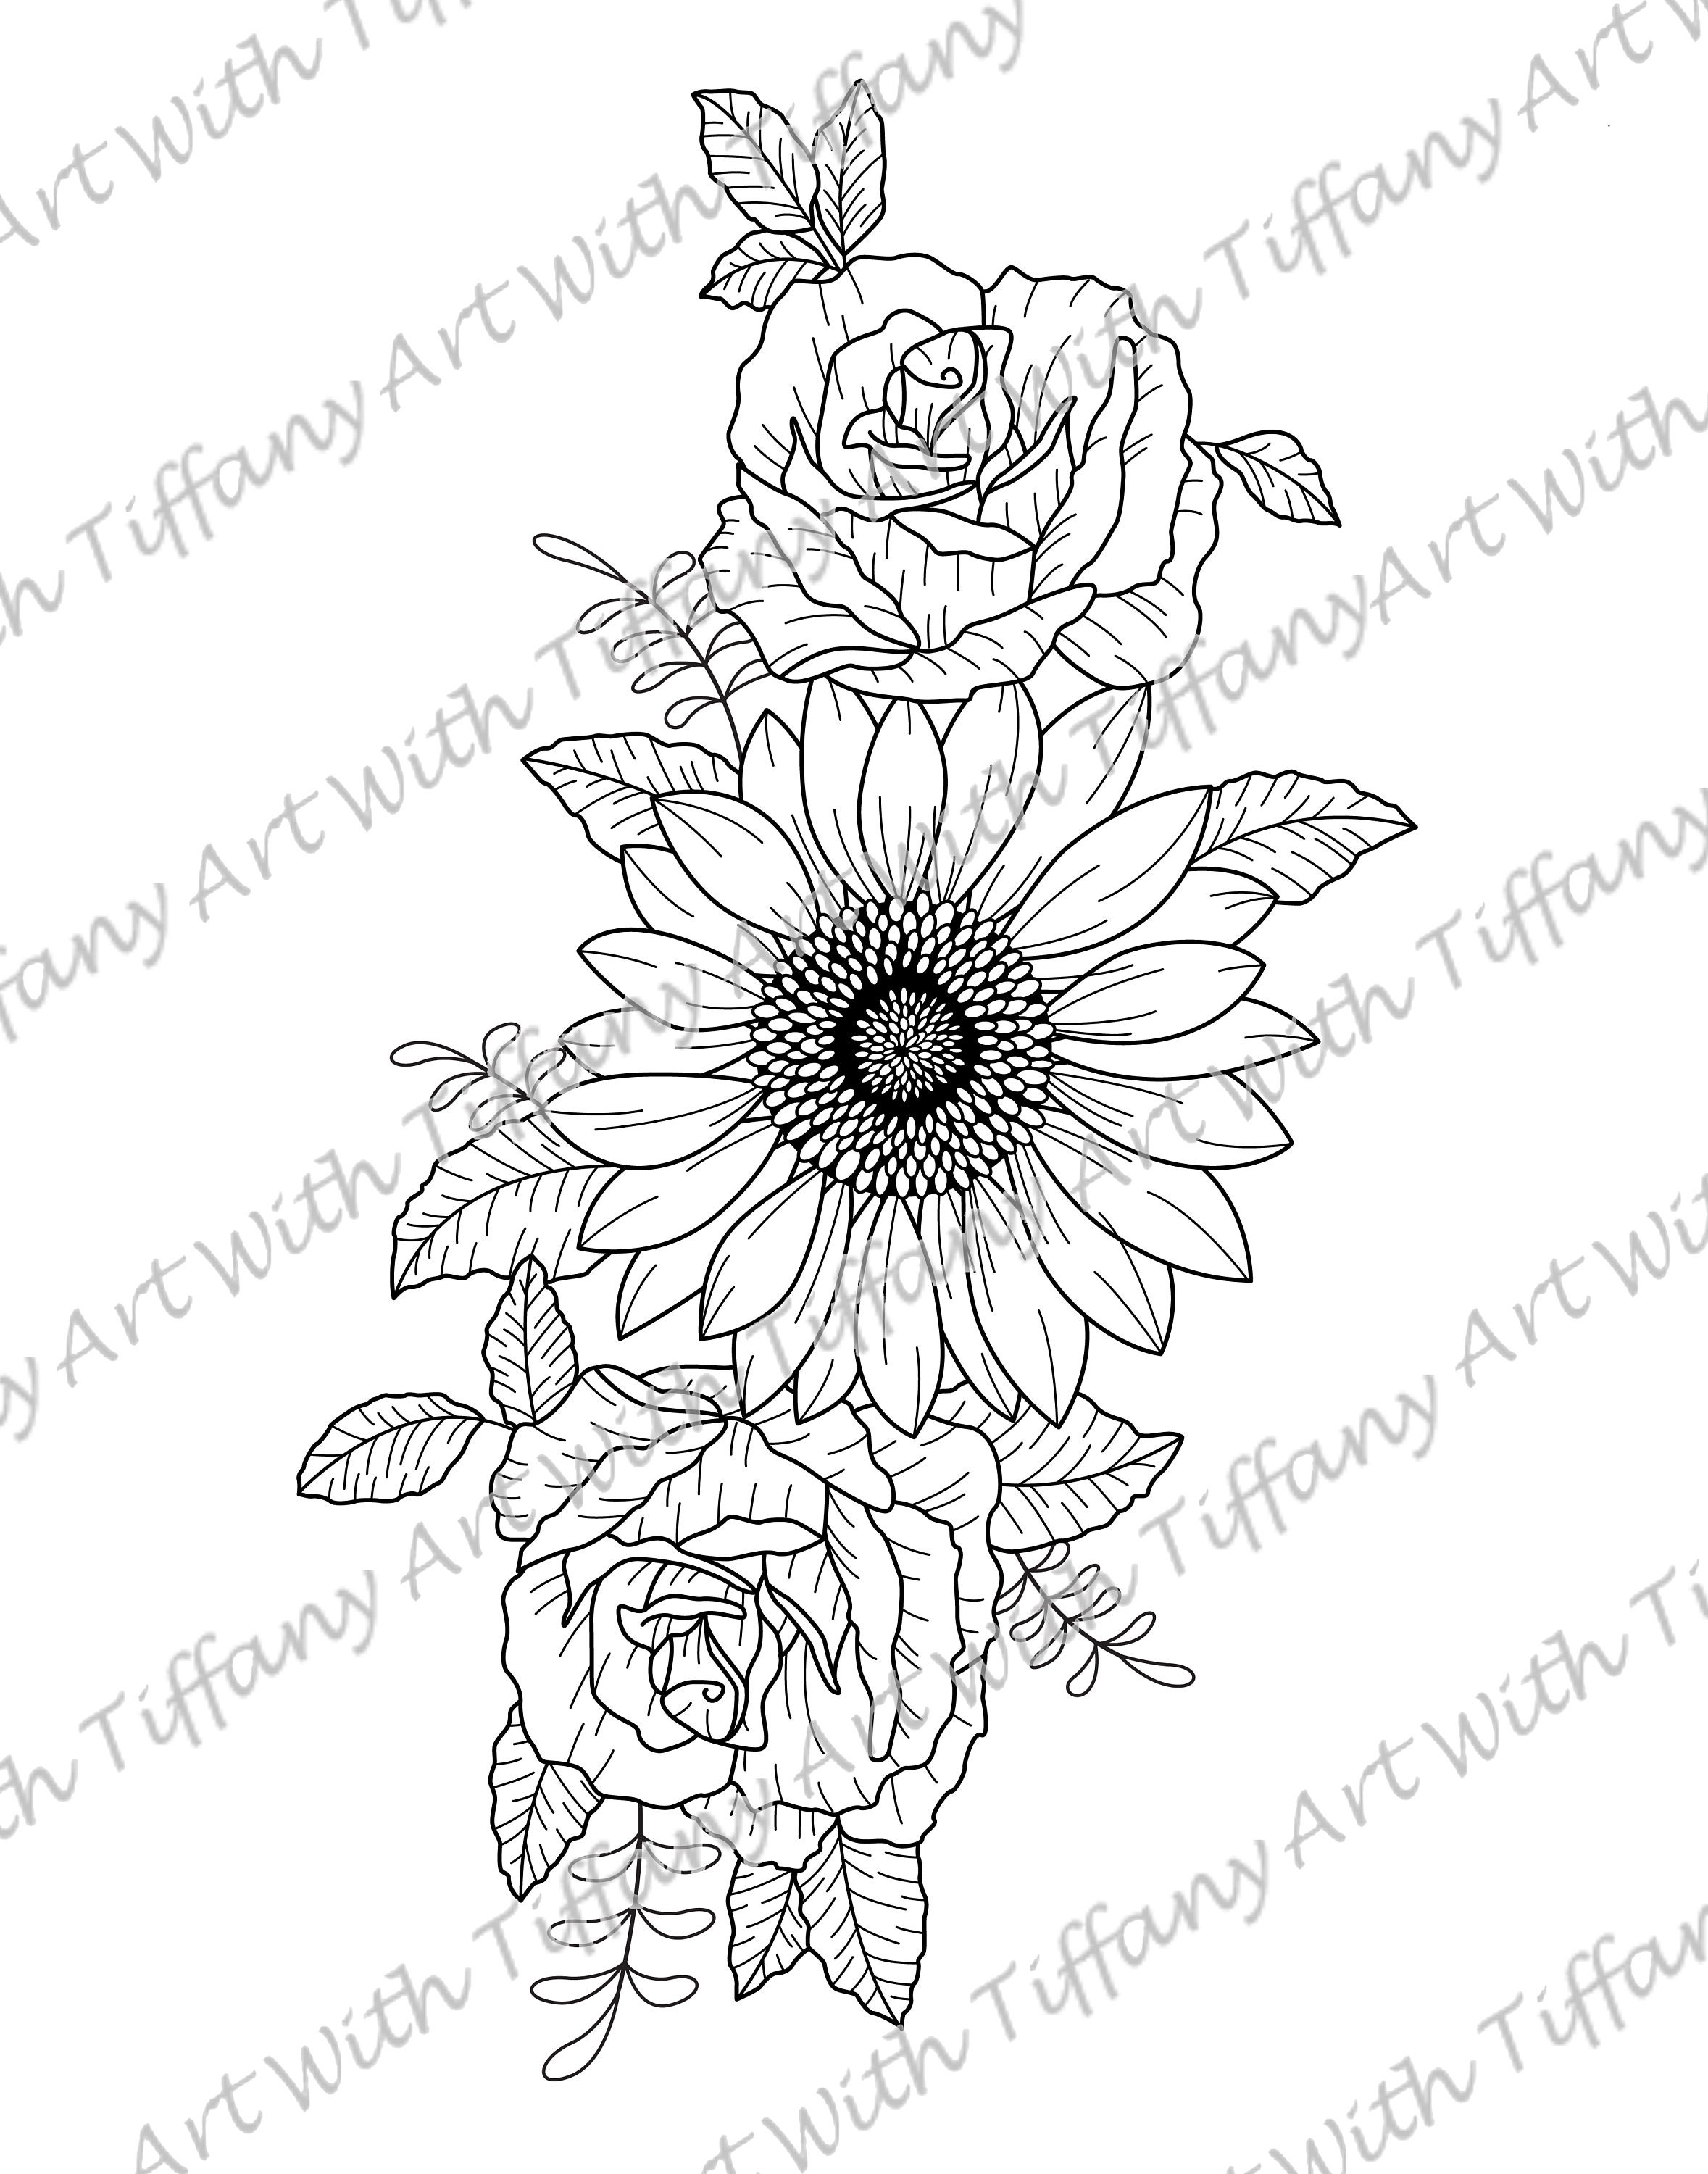 Tattoo Sunflower Sketch Vector Images over 320